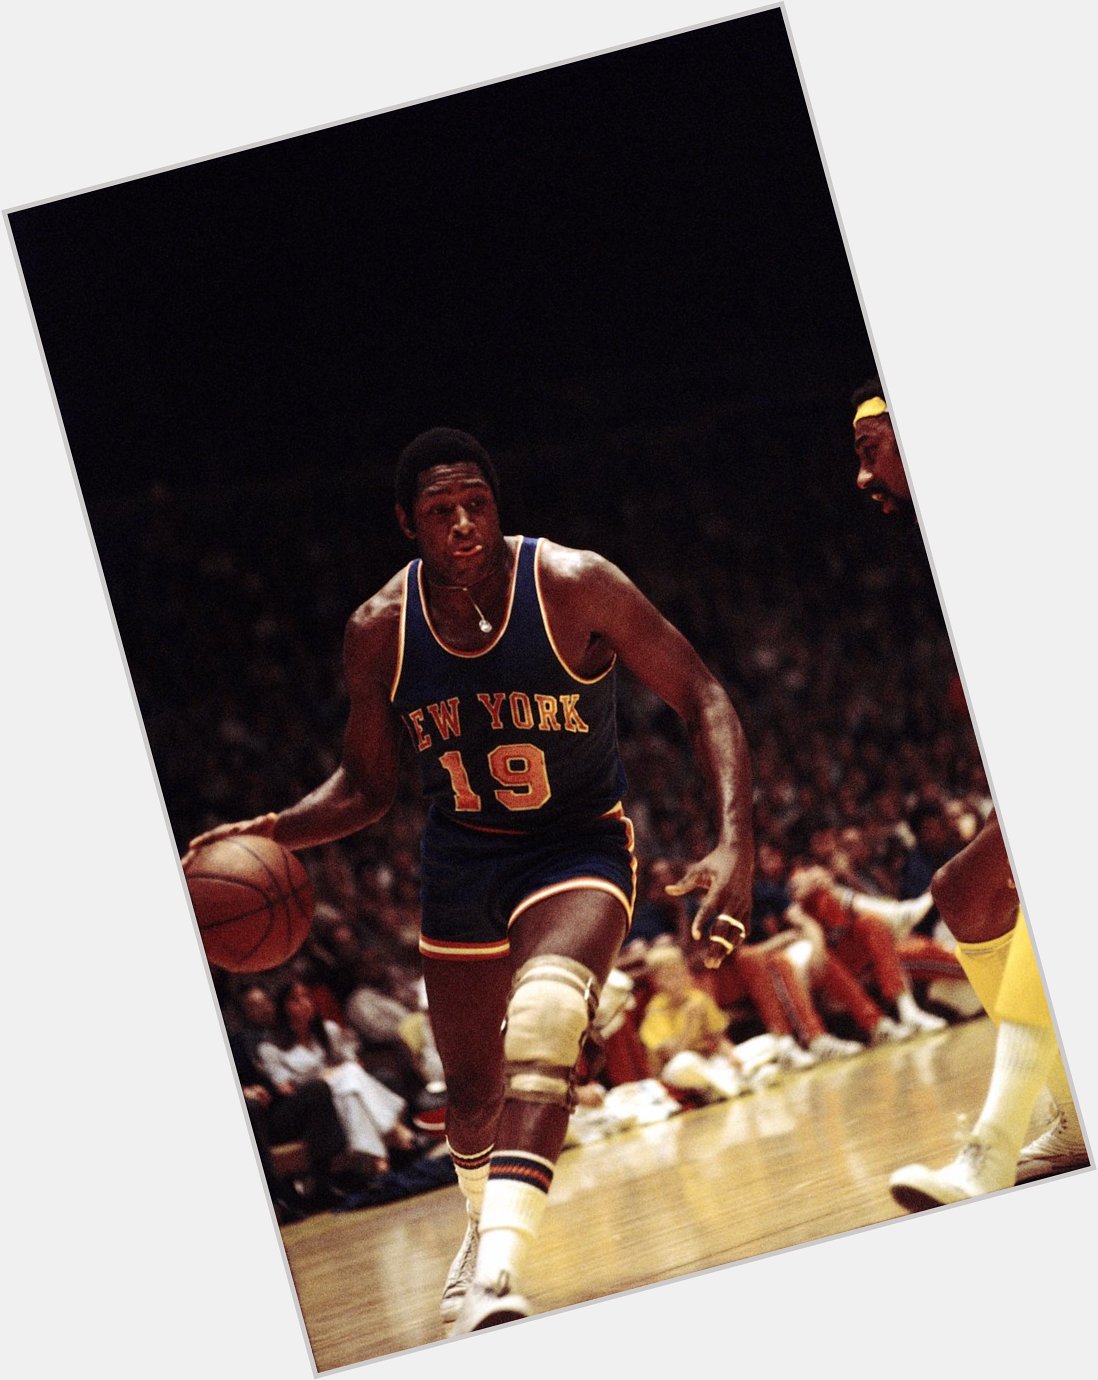 Happy Birthday to the one and only Willis Reed. 